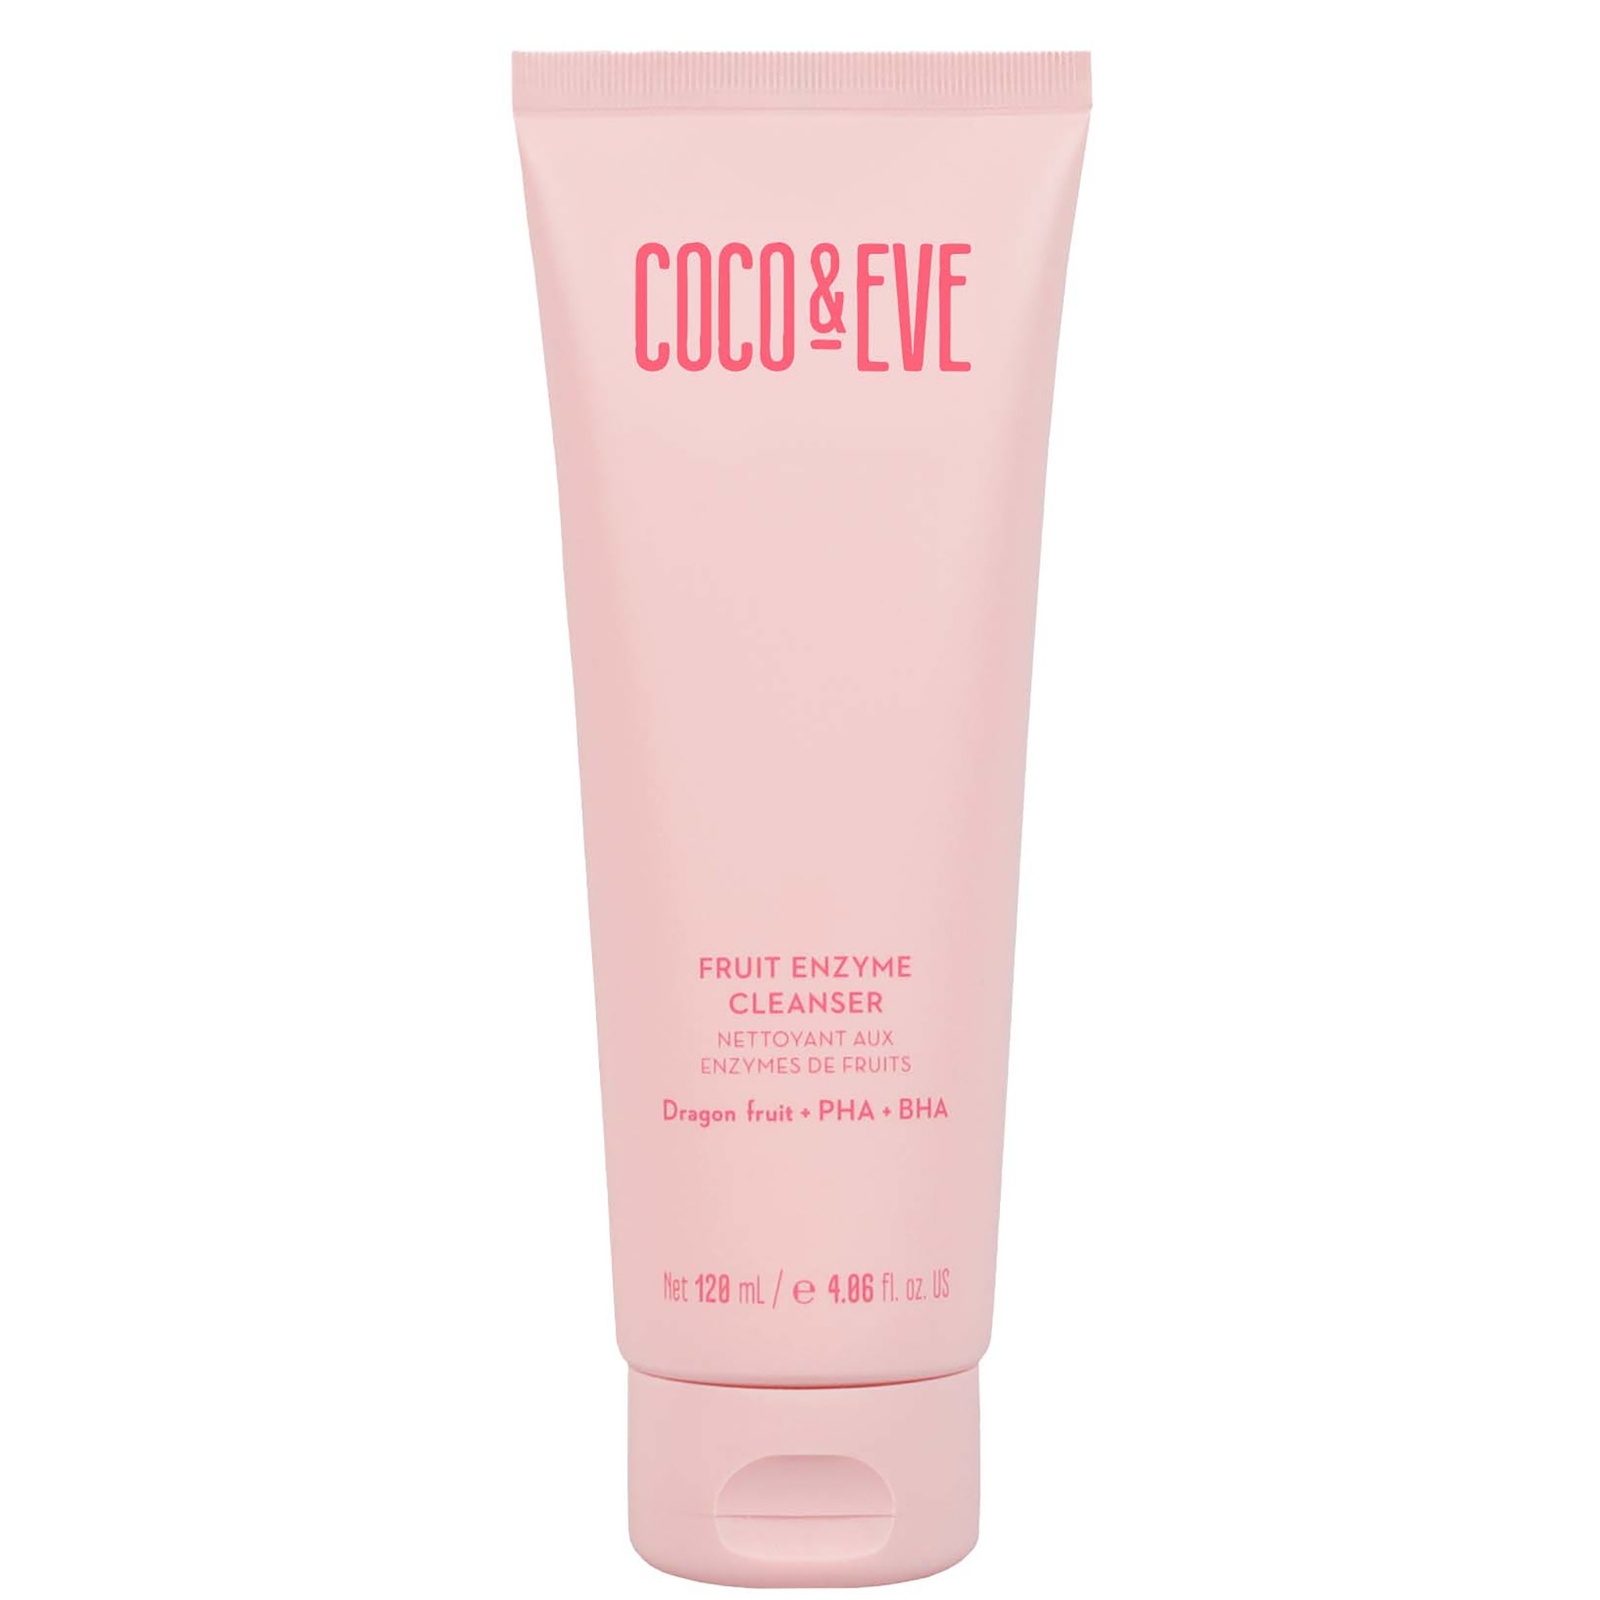 Photos - Facial / Body Cleansing Product Coco & Eve Fruit Enzyme Cleanser 120ml CE0001612020